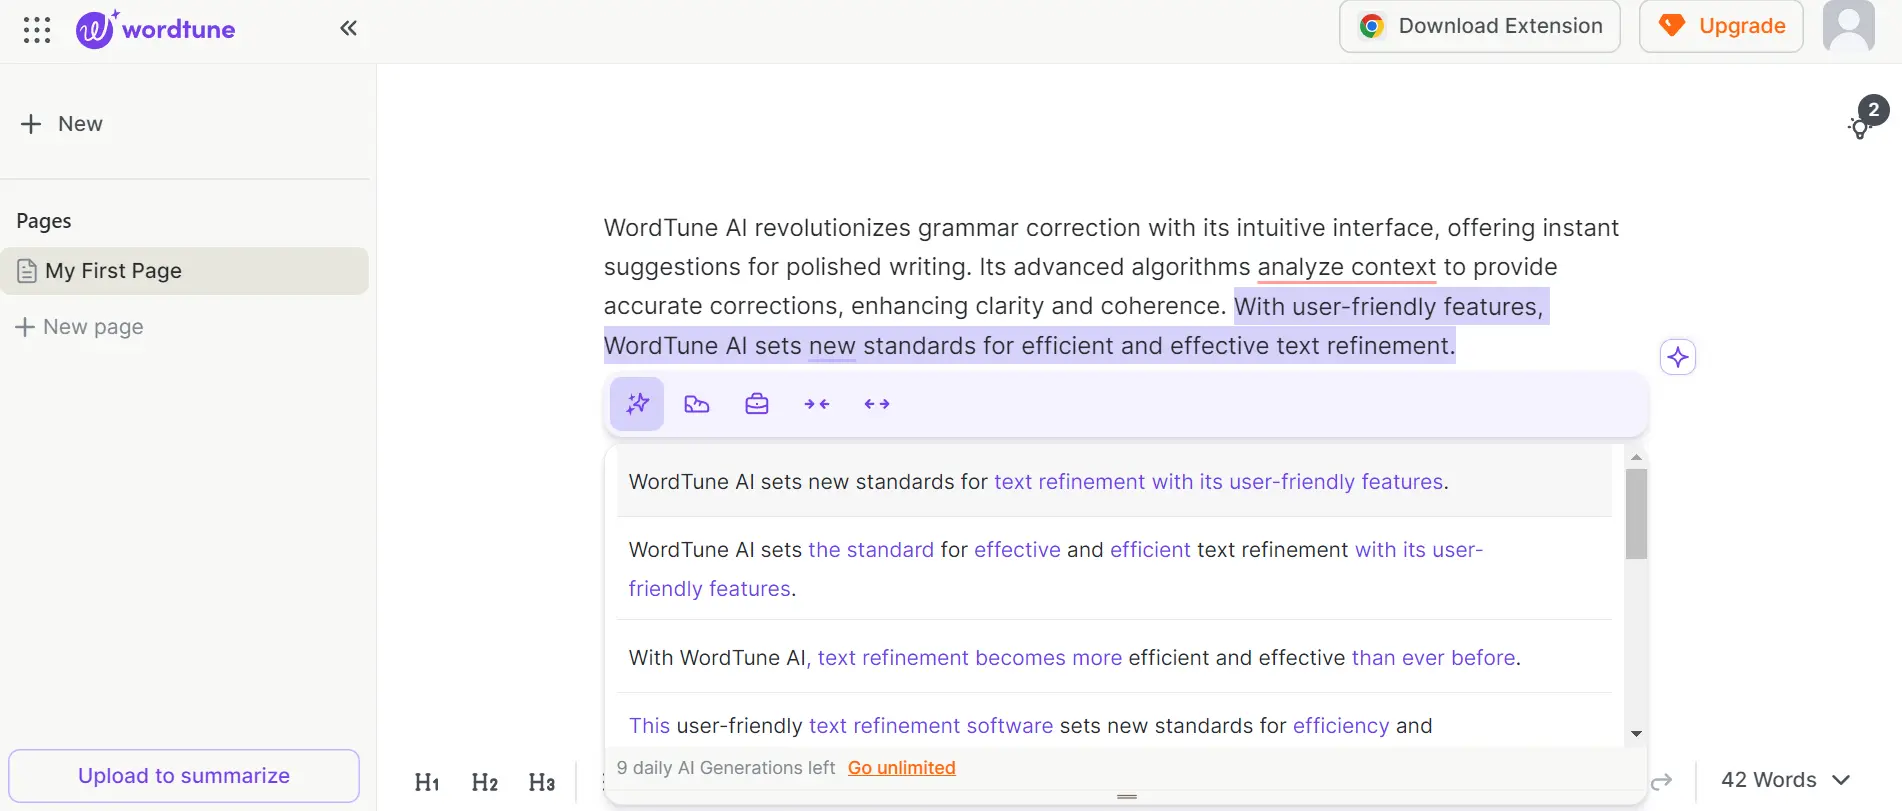 wordtune ai uses ai strengths to check grammar mistakes